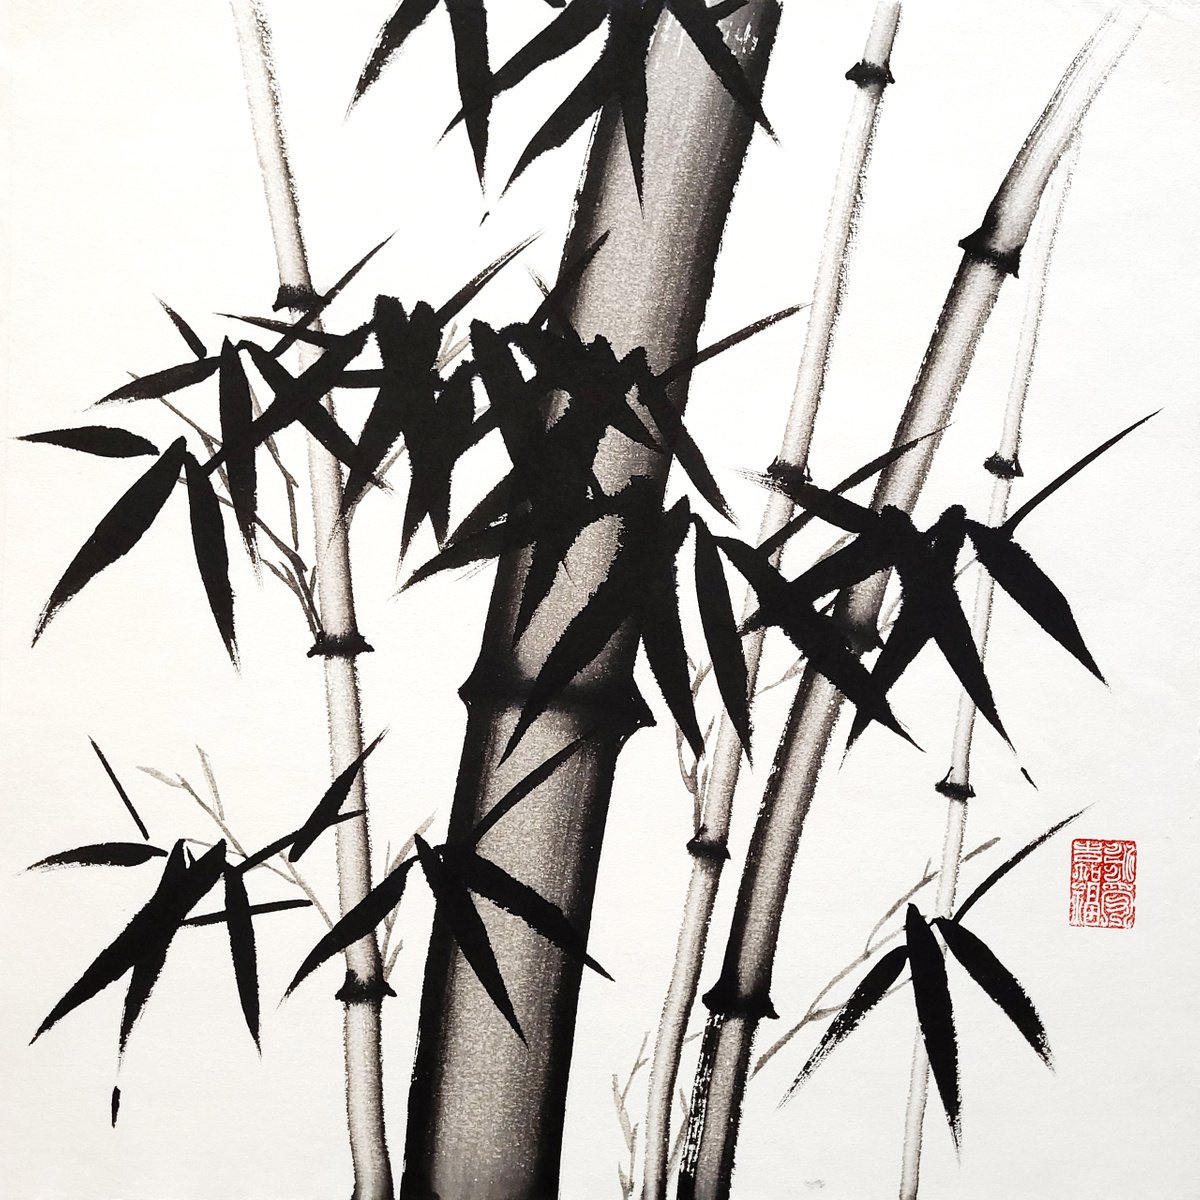 Bamboo forest - Bamboo series No. 2111 - Oriental Chinese Ink Painting by Ilana Shechter